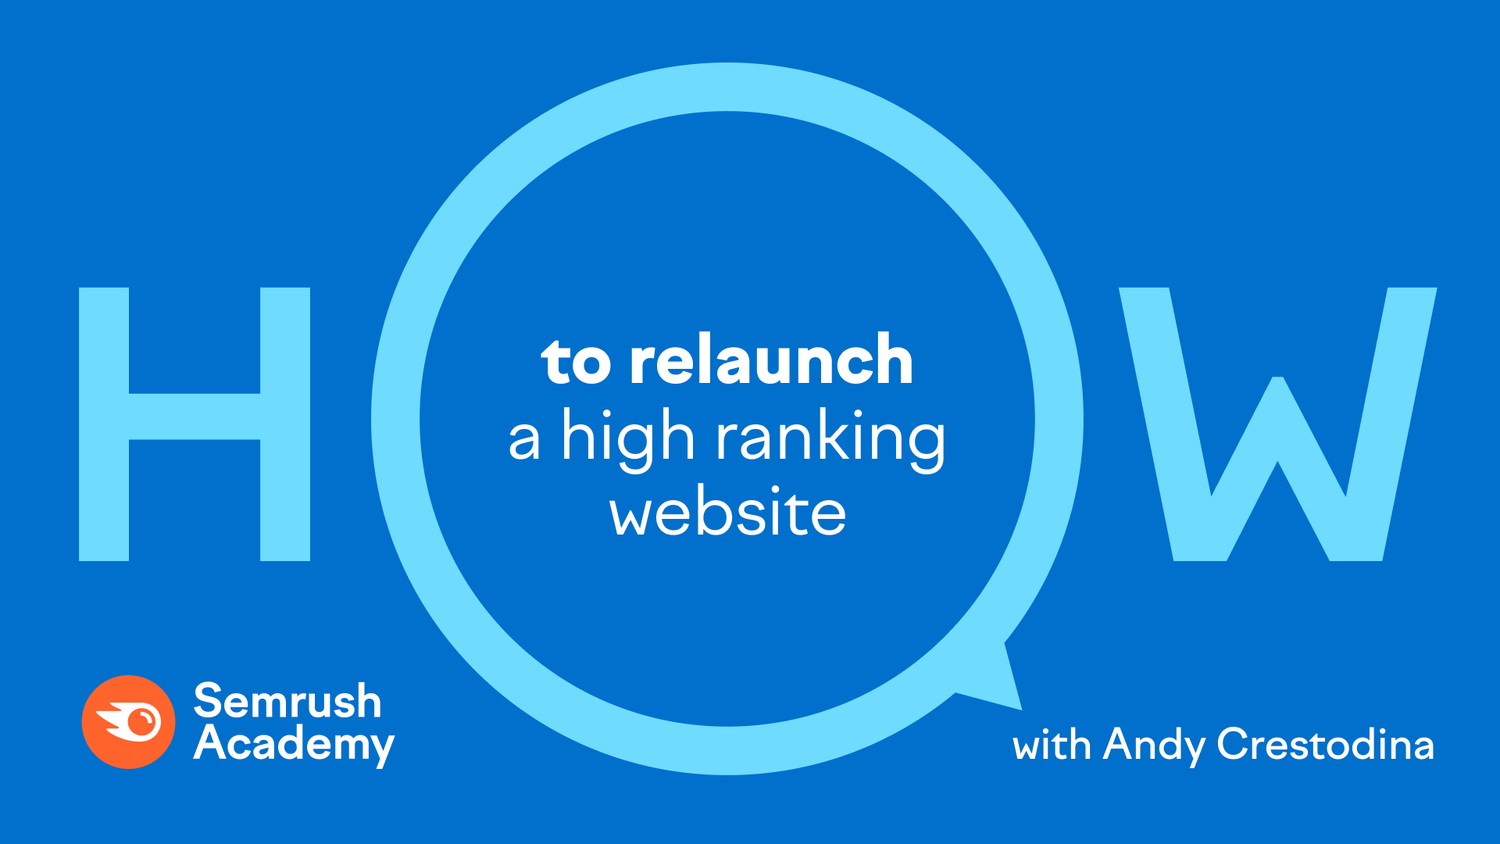 How to relaunch a high-ranking website